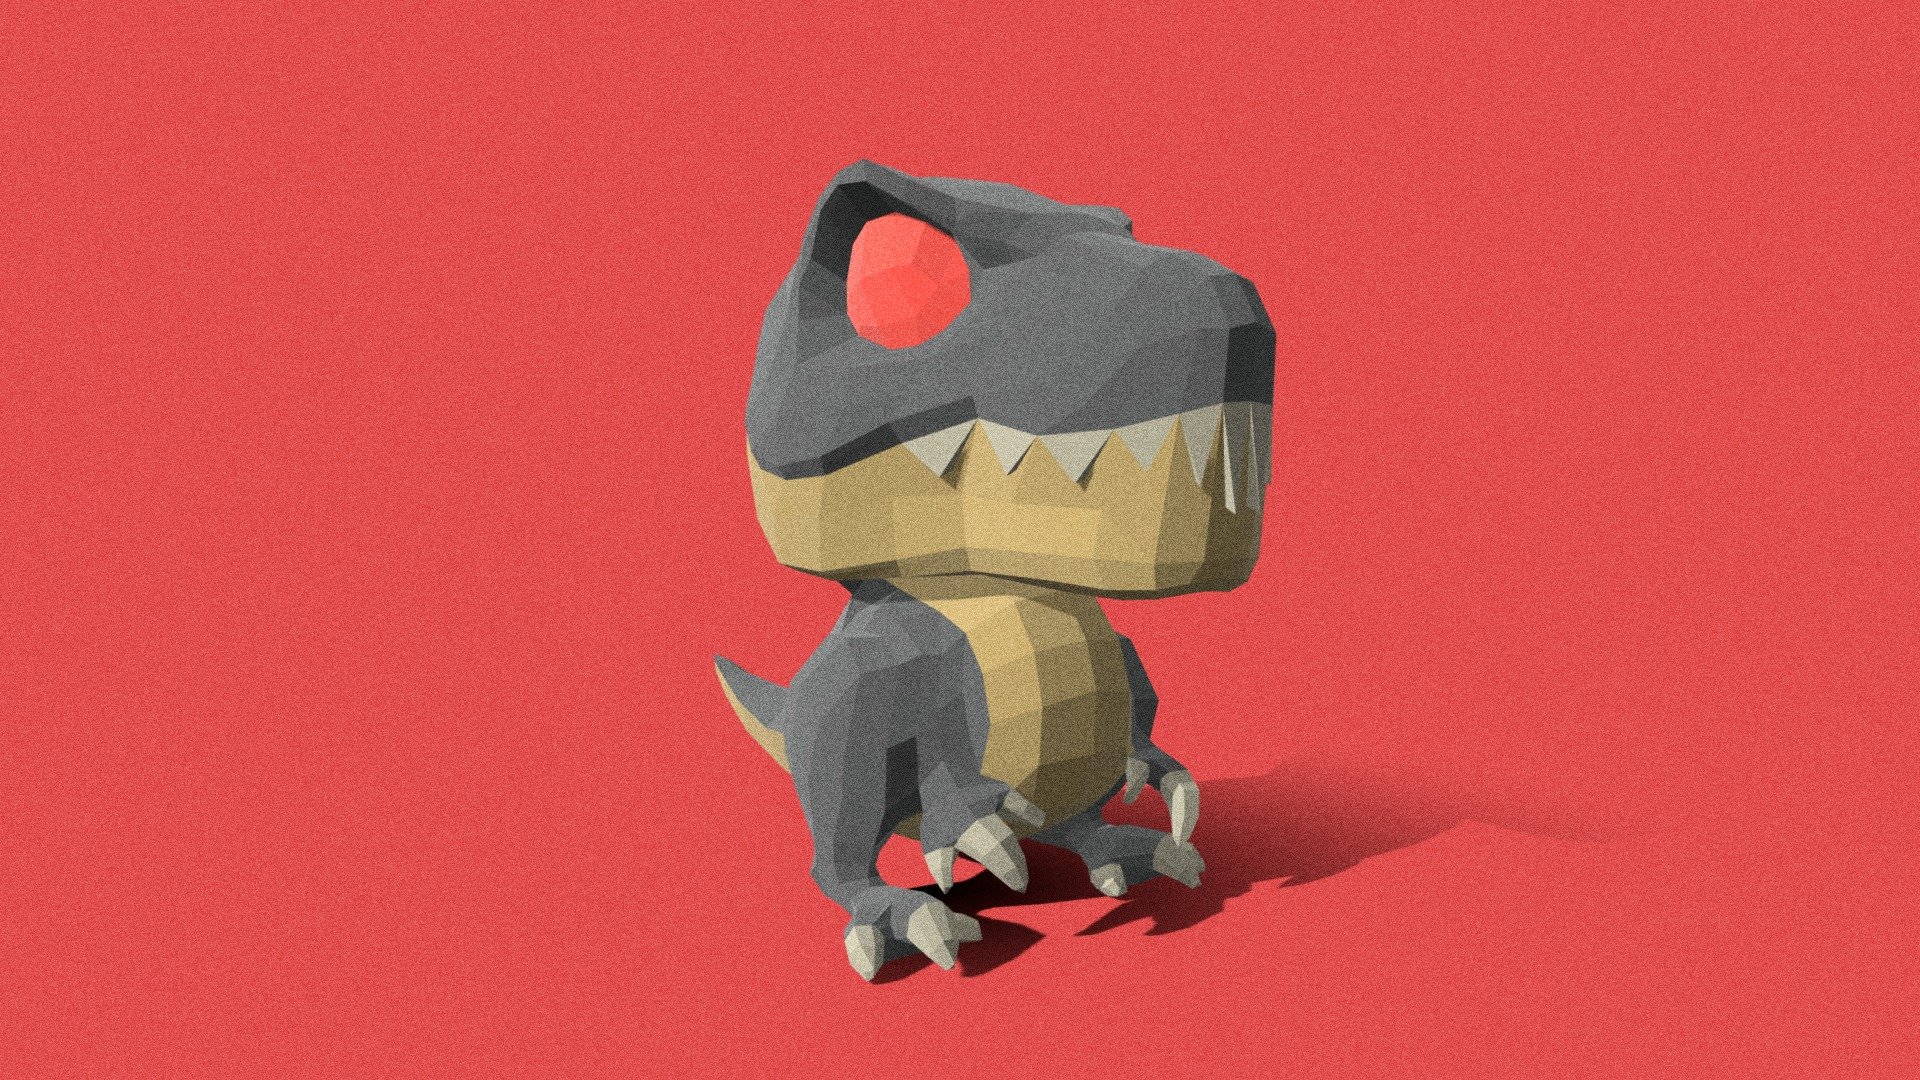 A cartoonic stylized lowpoly Dino character 3d model